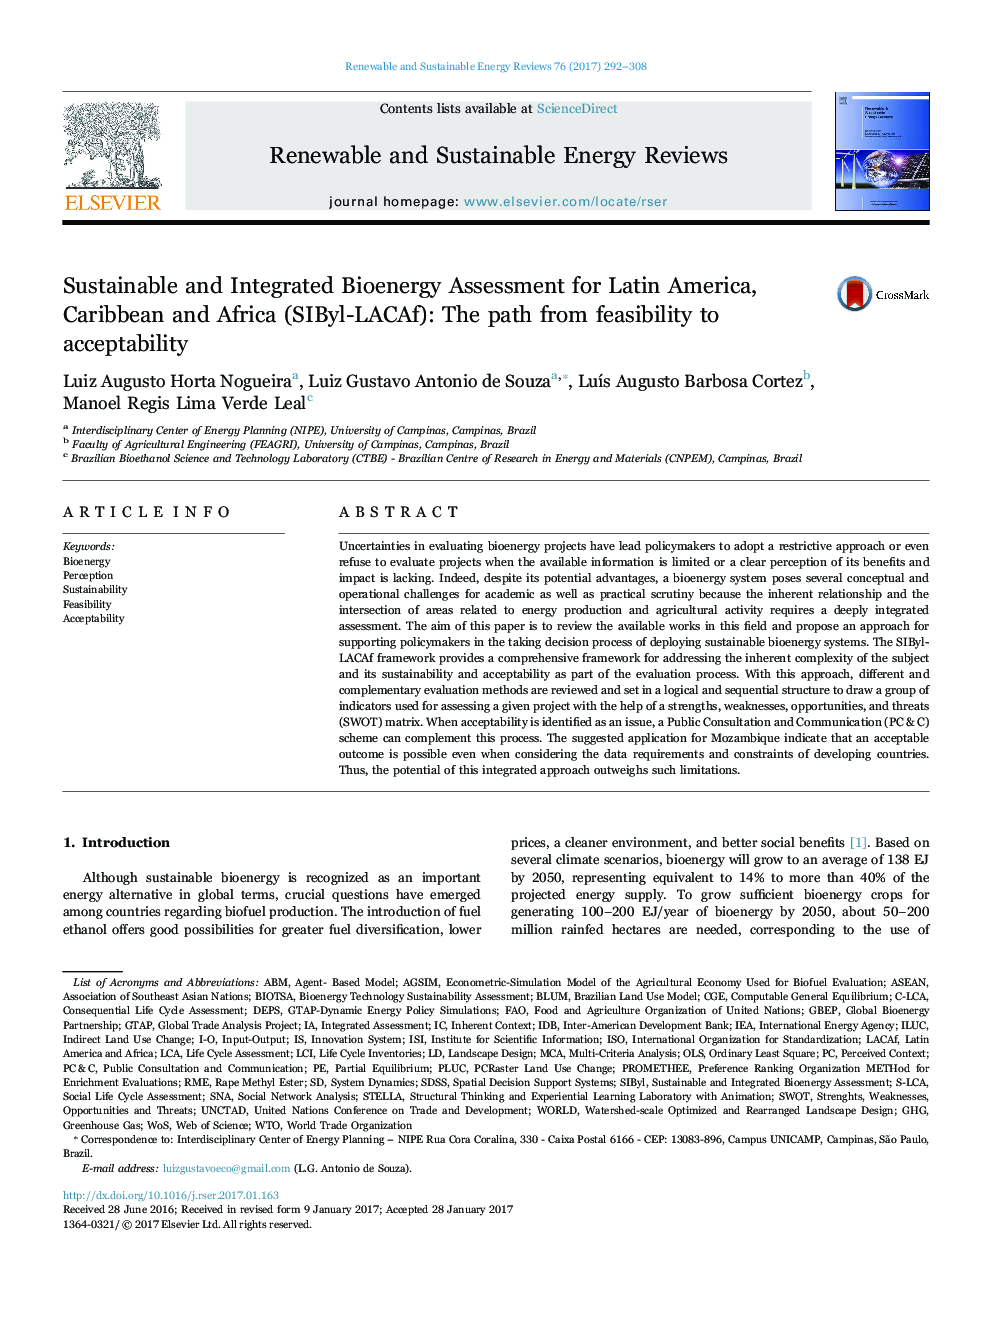 Sustainable and Integrated Bioenergy Assessment for Latin America, Caribbean and Africa (SIByl-LACAf): The path from feasibility to acceptability